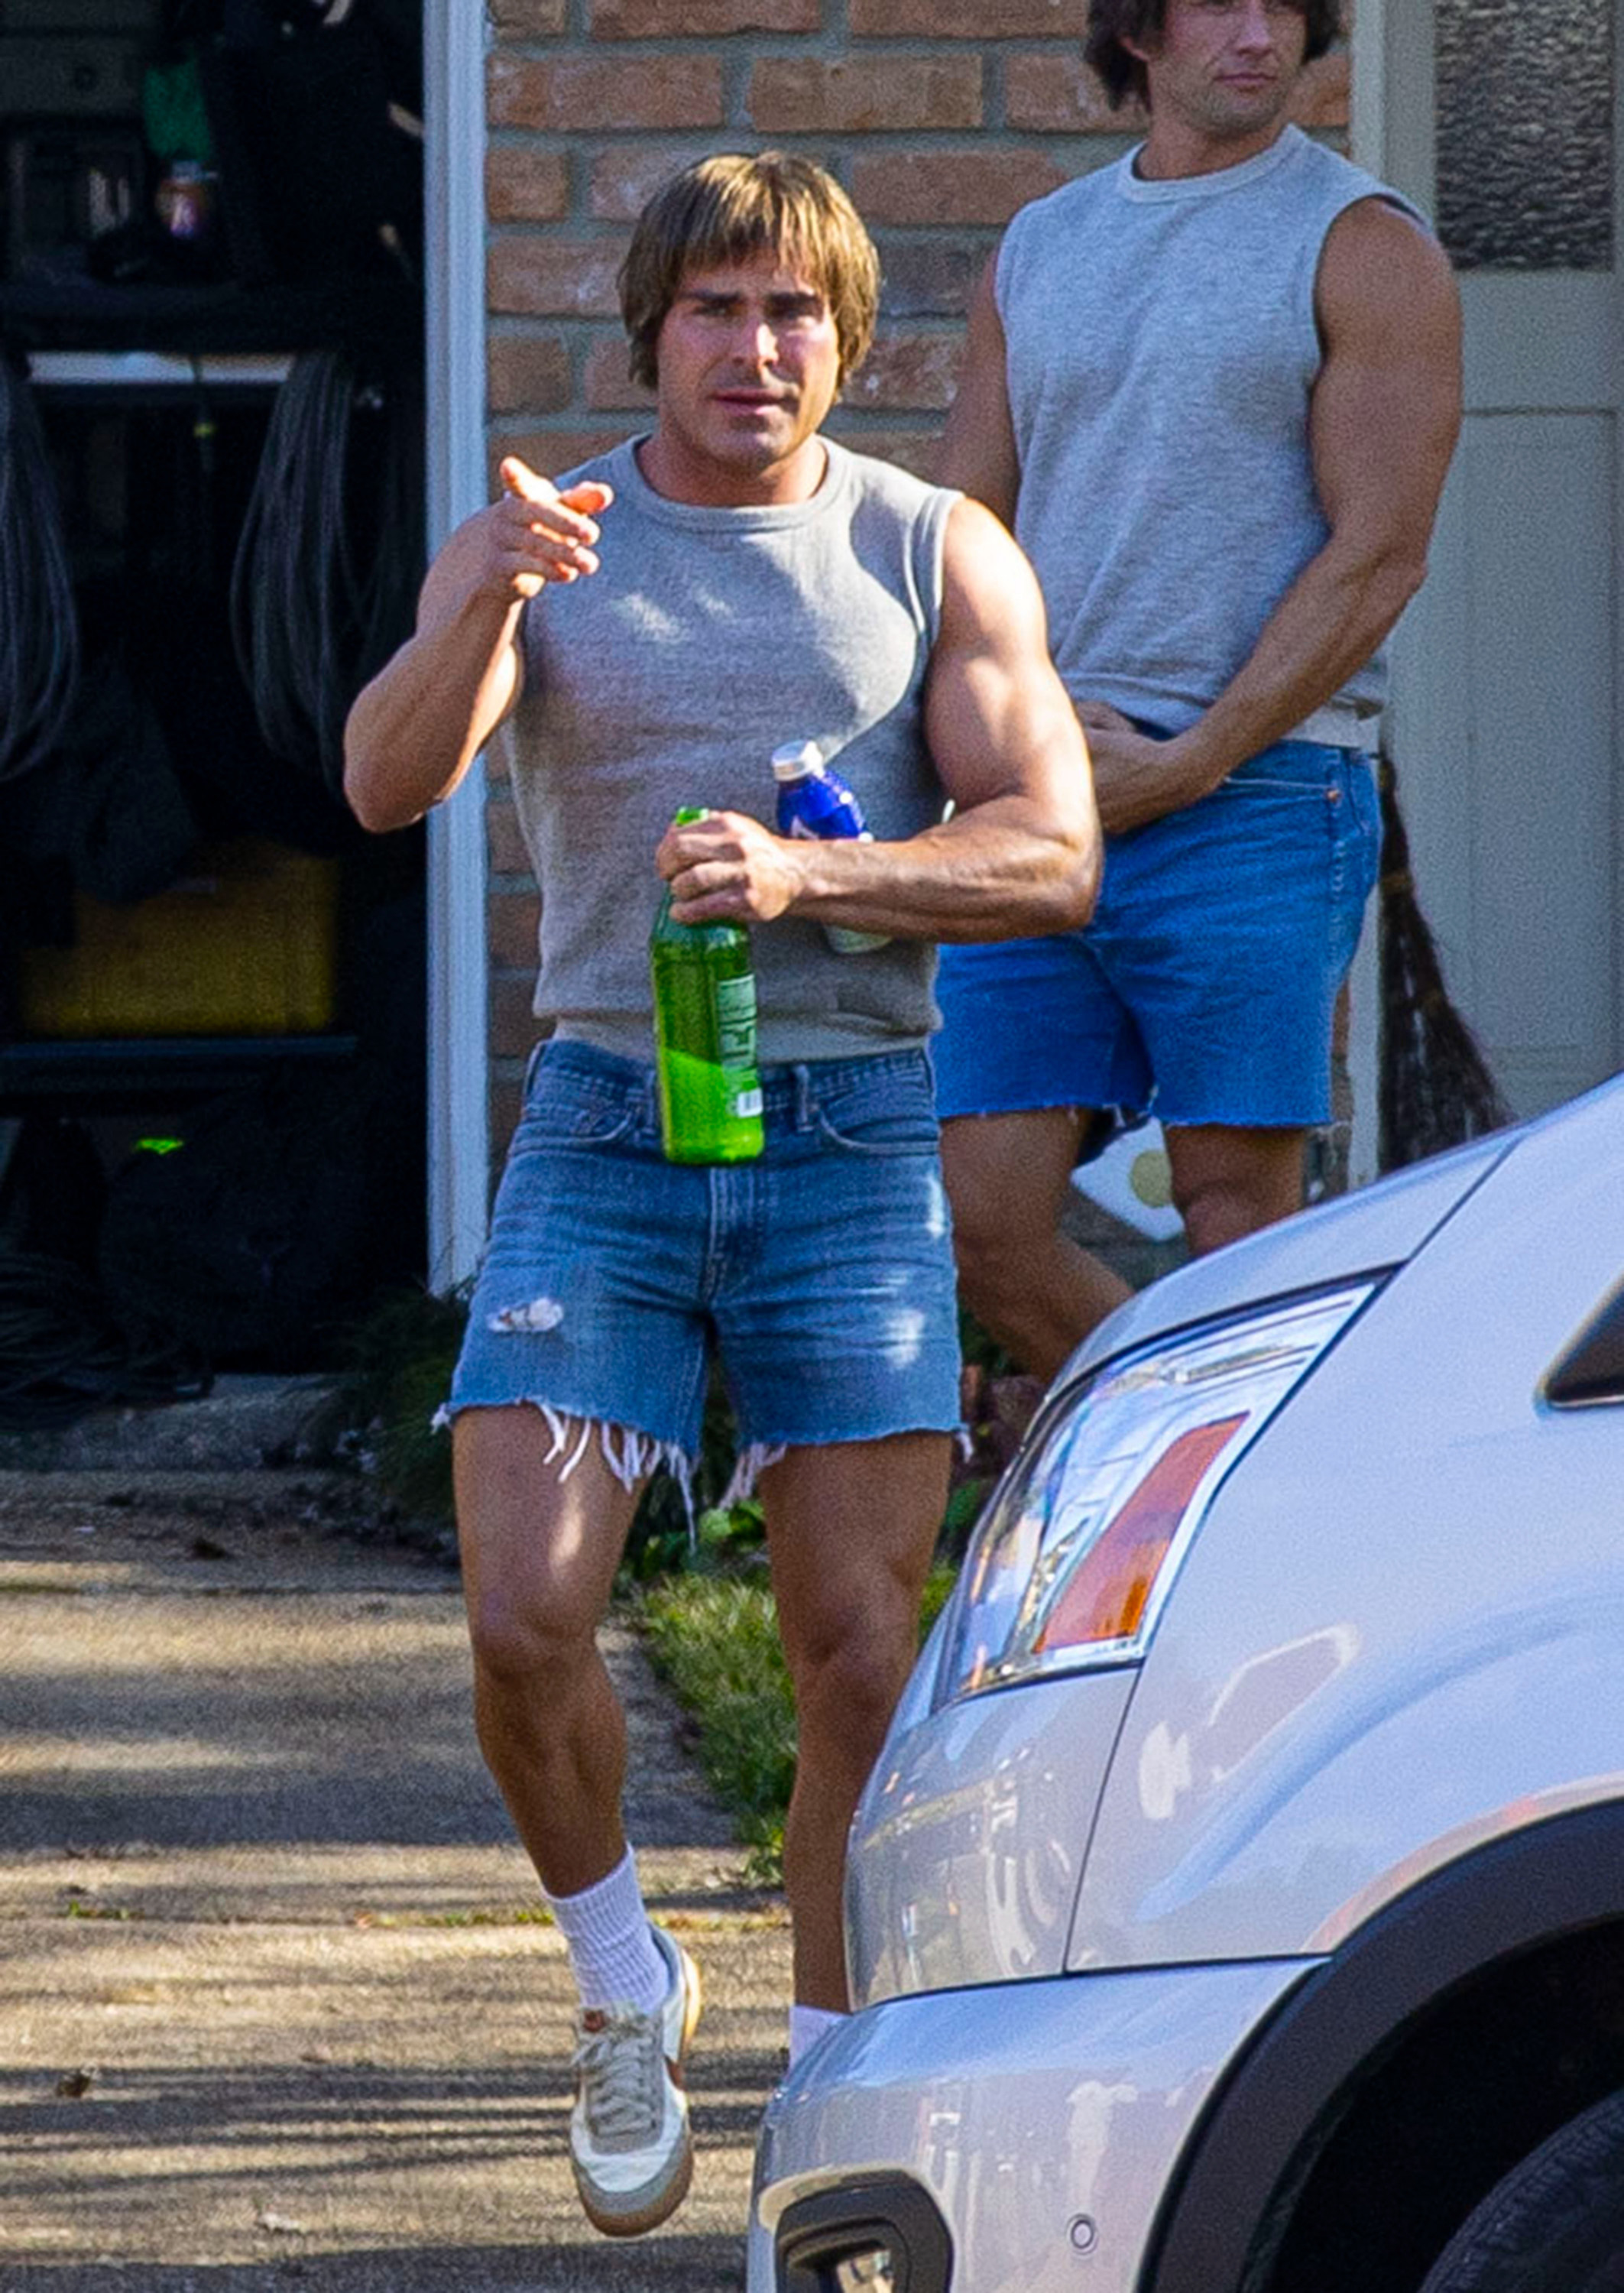 zac in cut off shorts and cut off shirt with a long grown out bowl cut